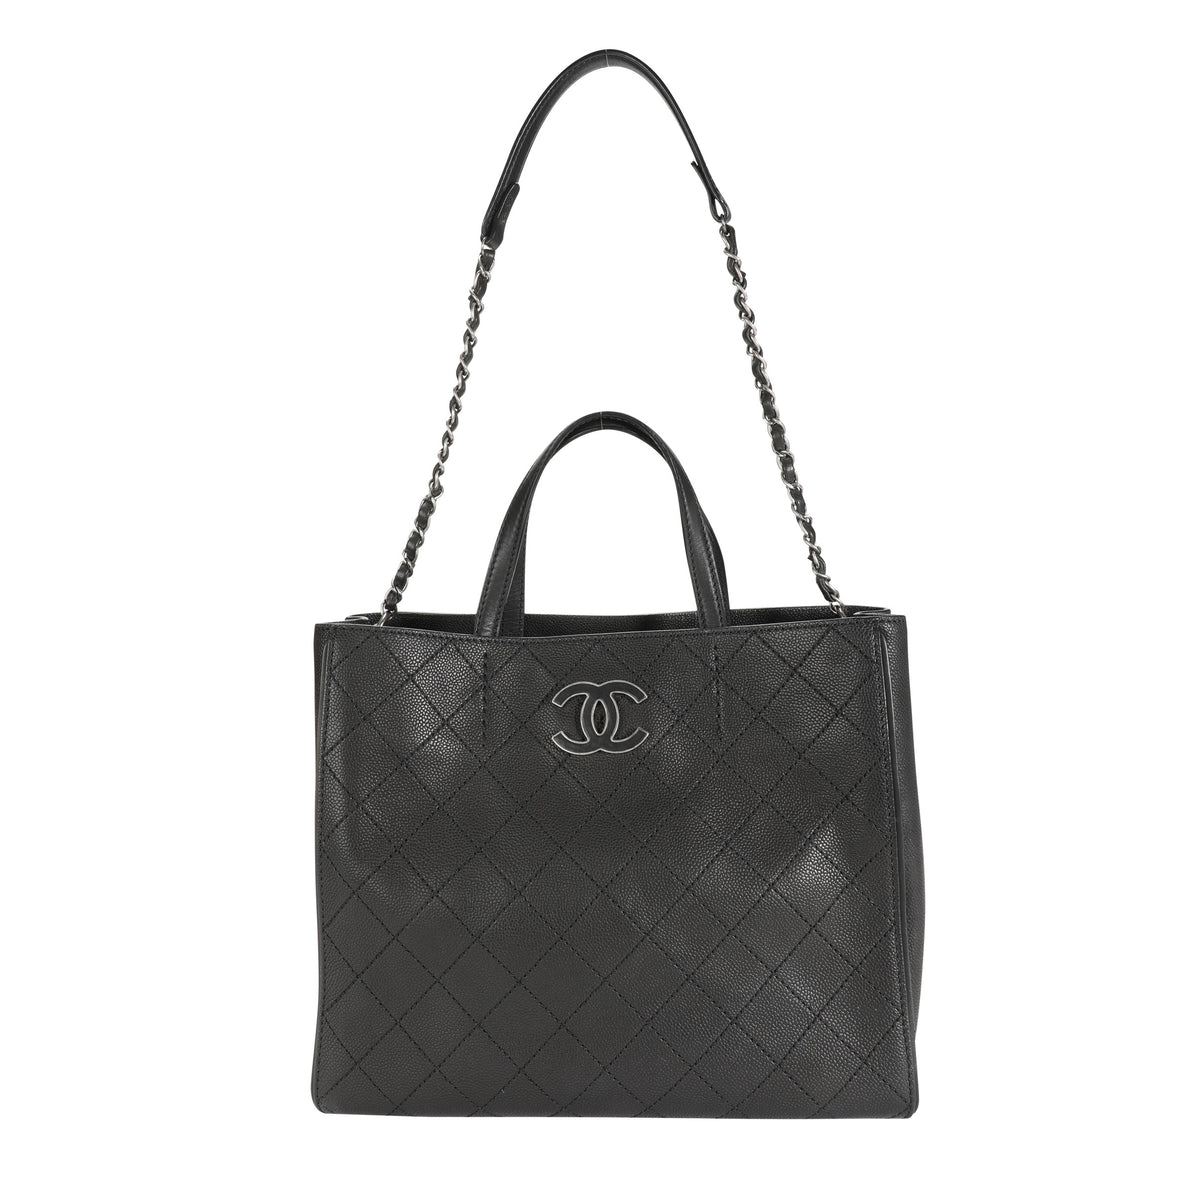 Chanel Black Stitched Grained Calfskin Hamptons Tote For Sale at